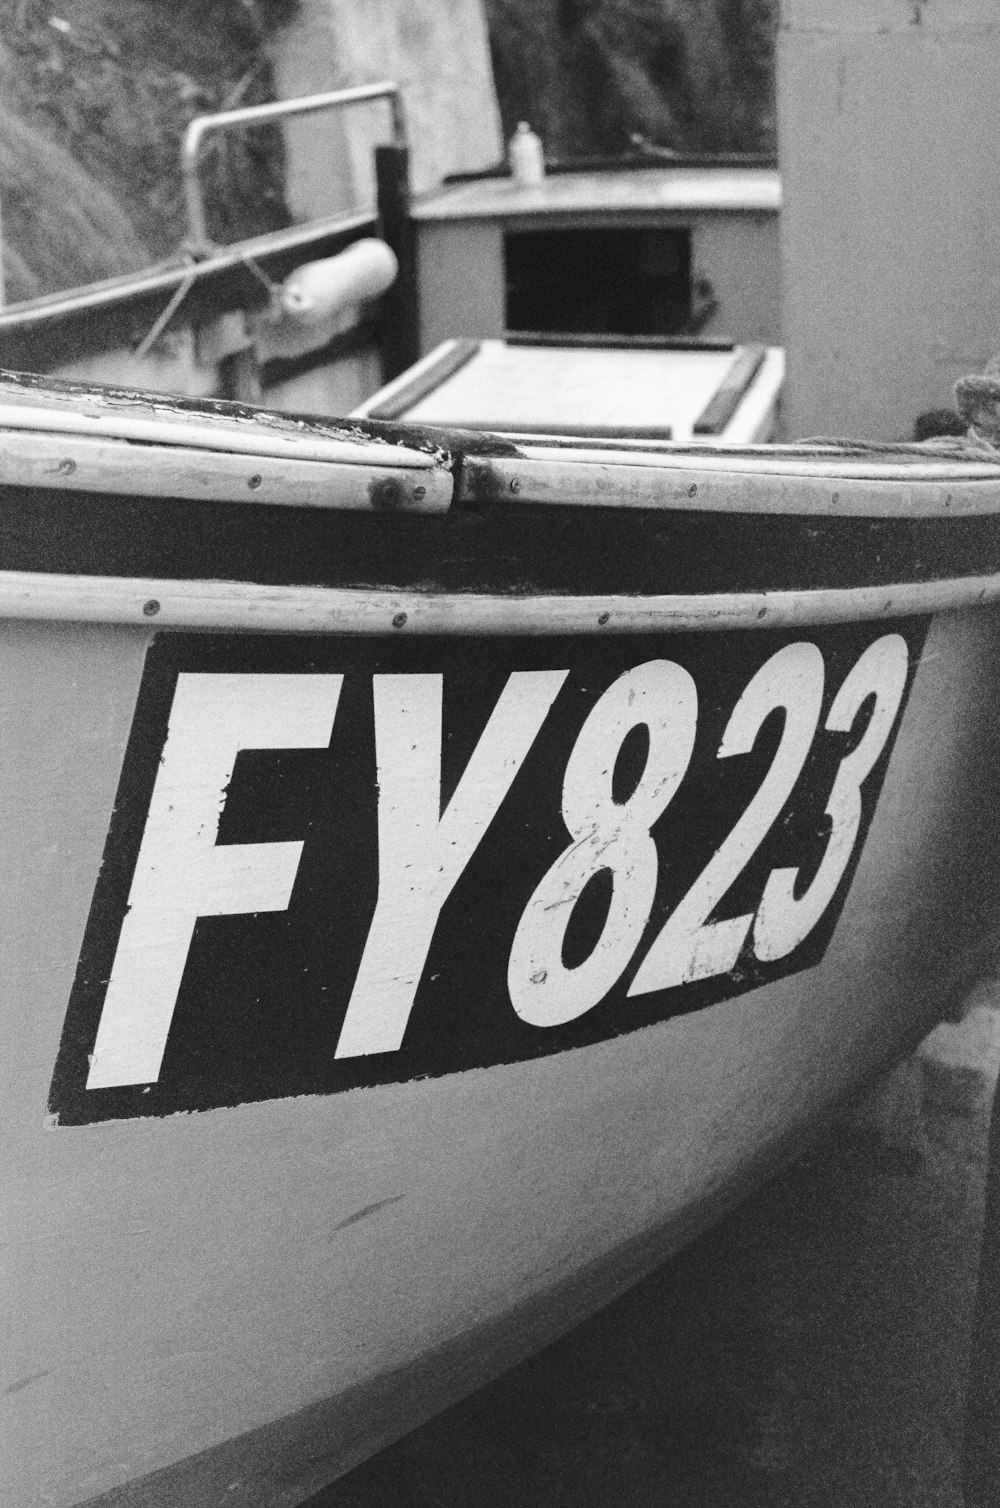 a close up of a boat with a number on it